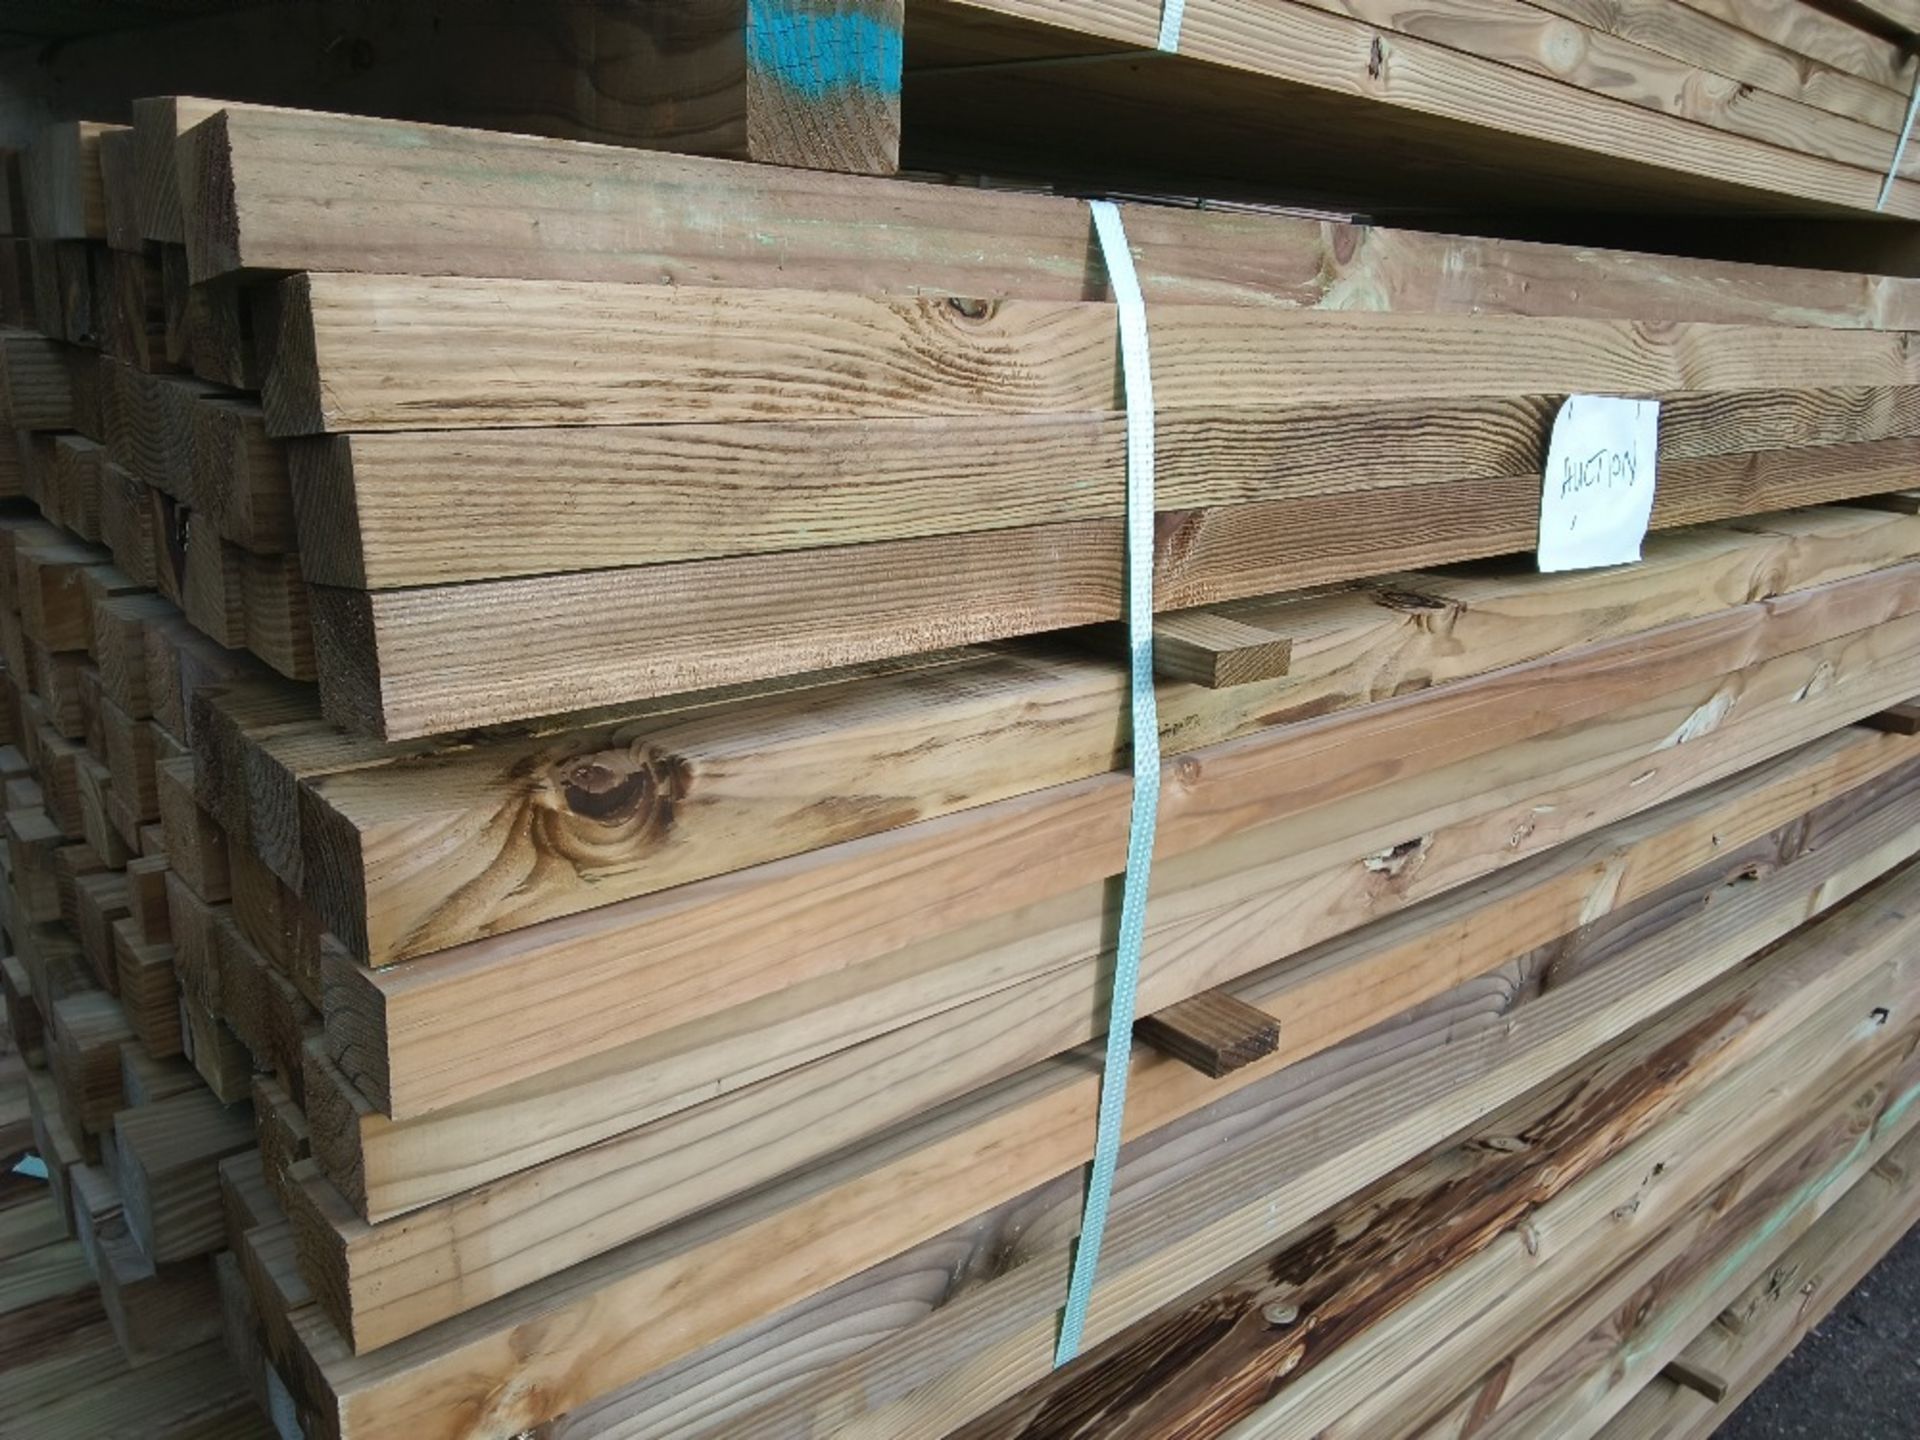 LARGE PACK OF APPROXIMATELY 200 PIECES OF TREATED TIMBER BATTENS / POSTS MOSTLY 50-55MM X 45MM APPRO - Image 3 of 3